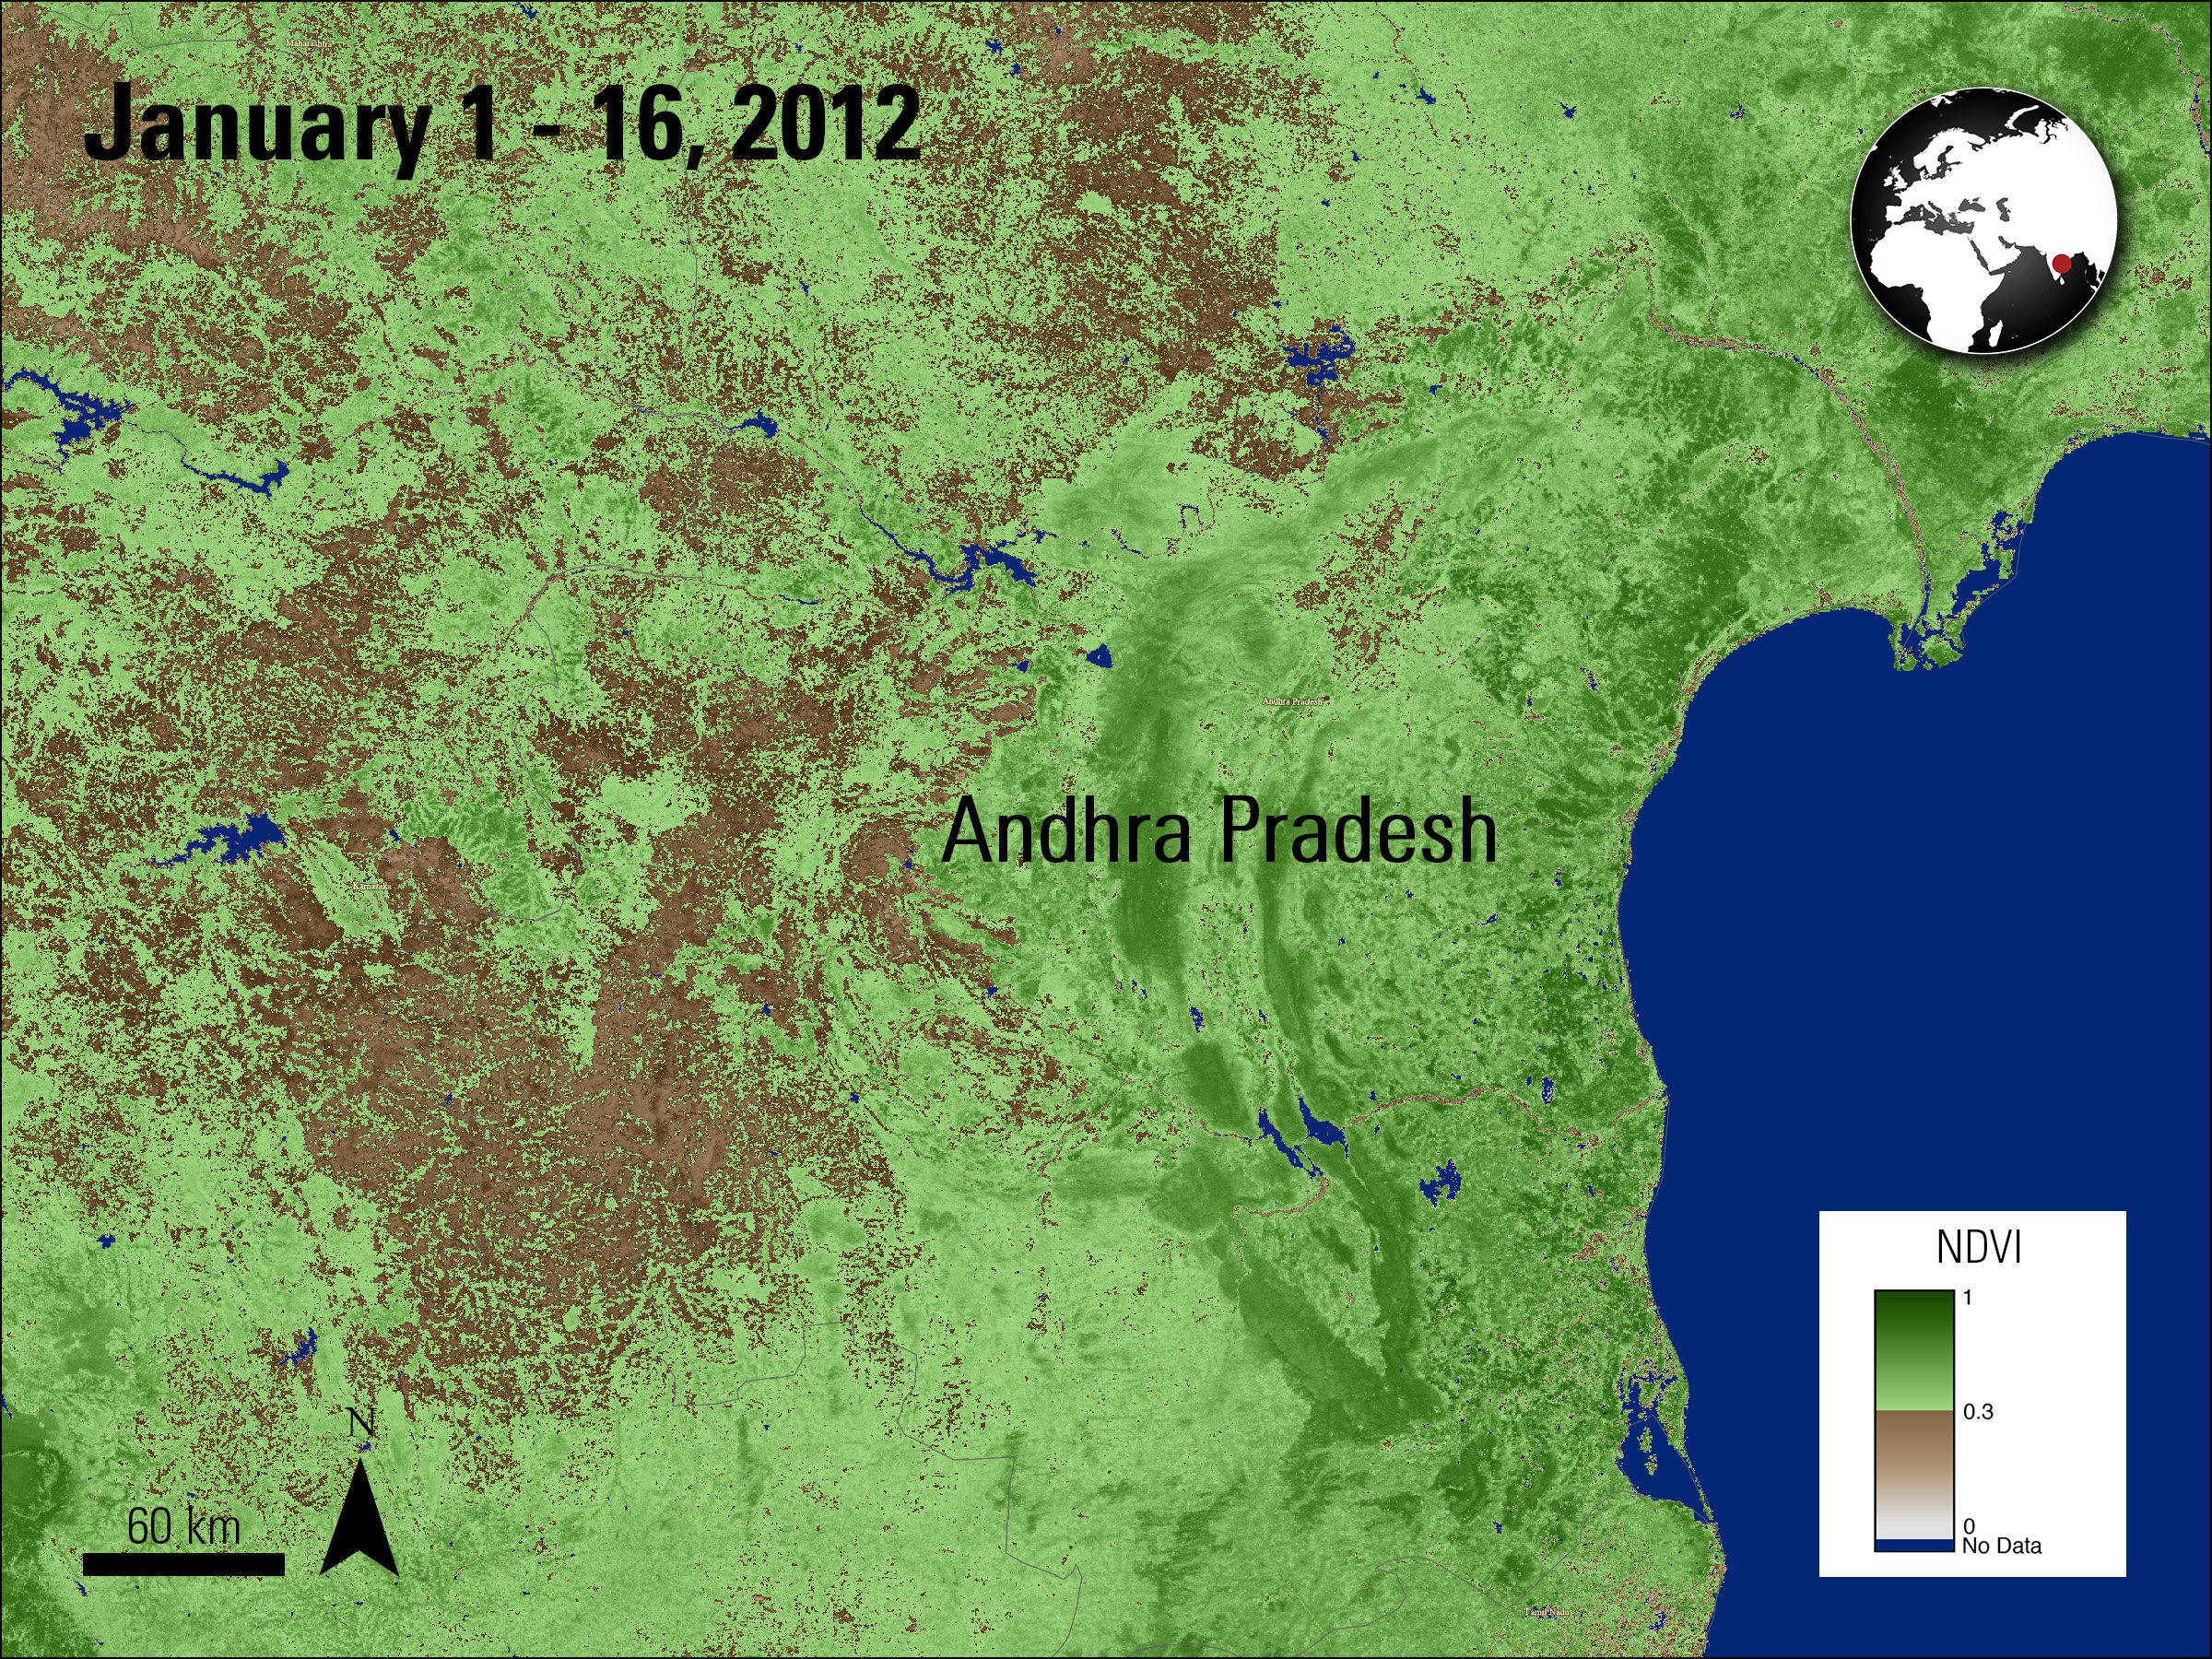 Terra MODIS NDVI data (MOD13Q1) over Andhra Pradesh, India, acquired between January 1 and 16, 2012.